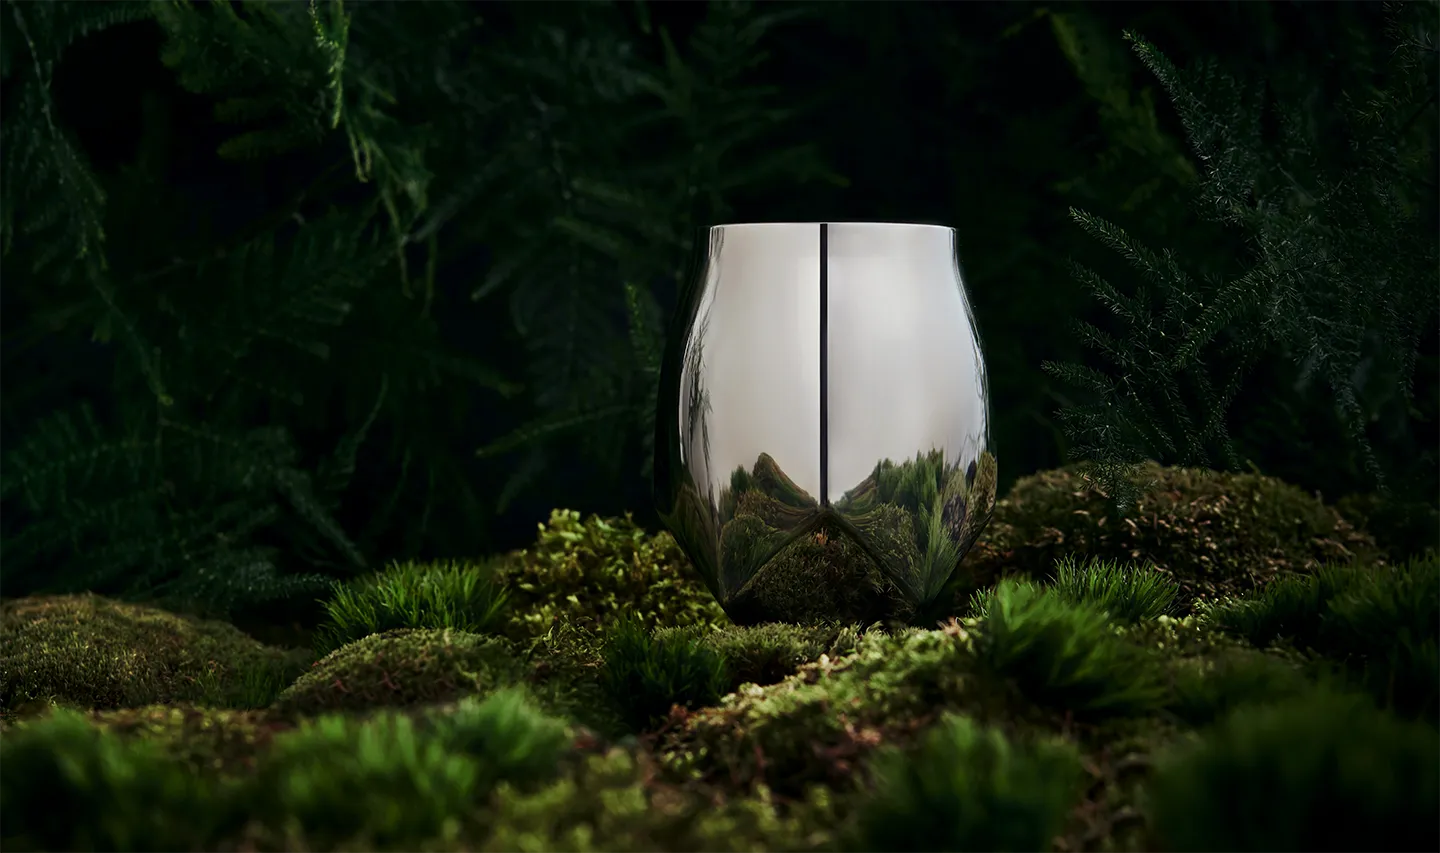 The Norlan Steel Tumbler, ideal for enjoying drinks outdoors, shown here on a mossy foreground